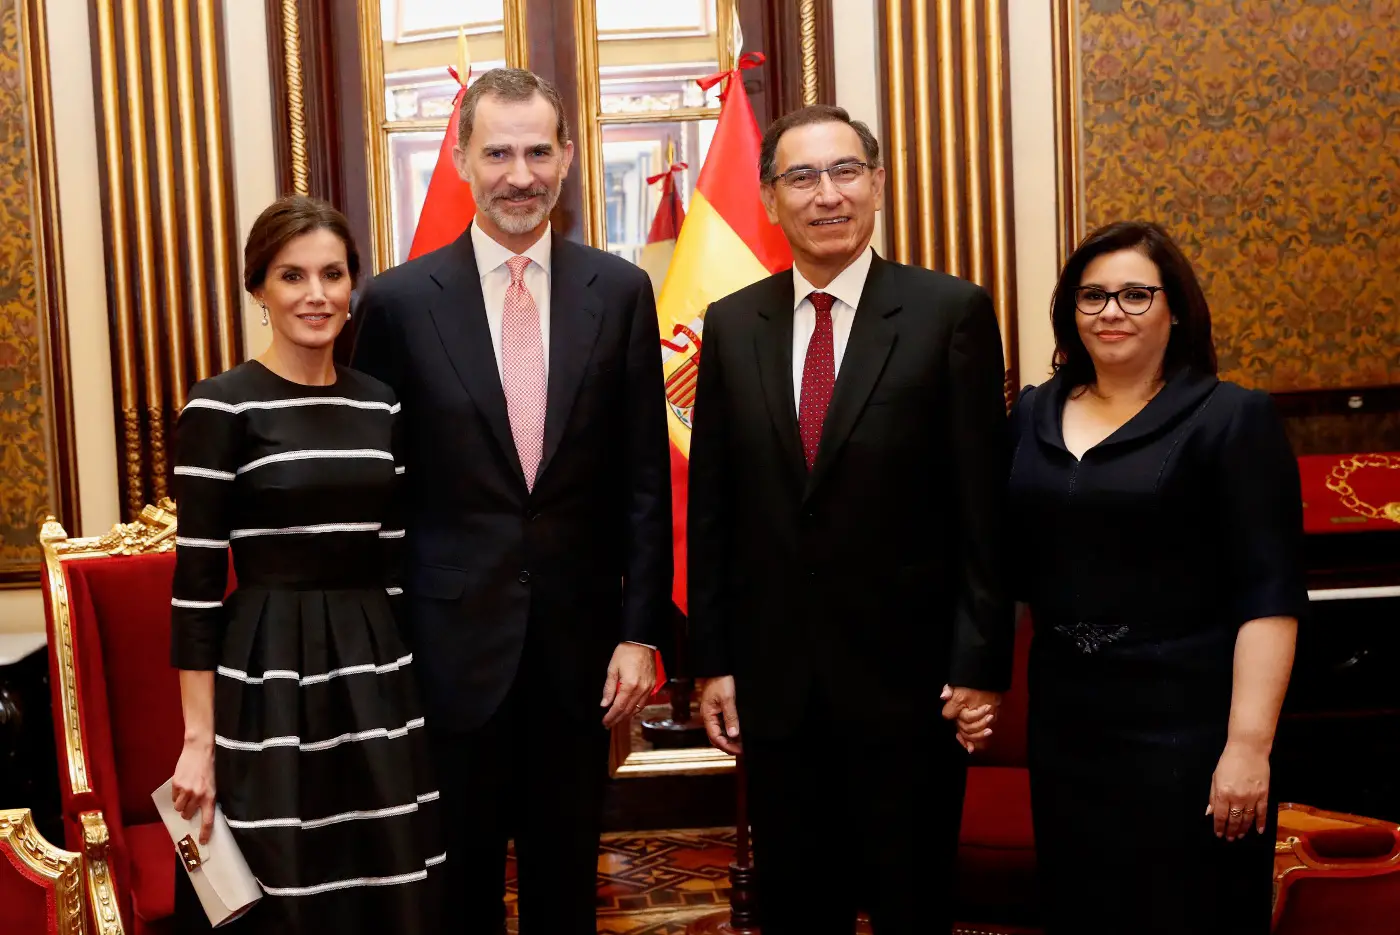 Queen Letizia of Spain on the Day one of the Peru visit